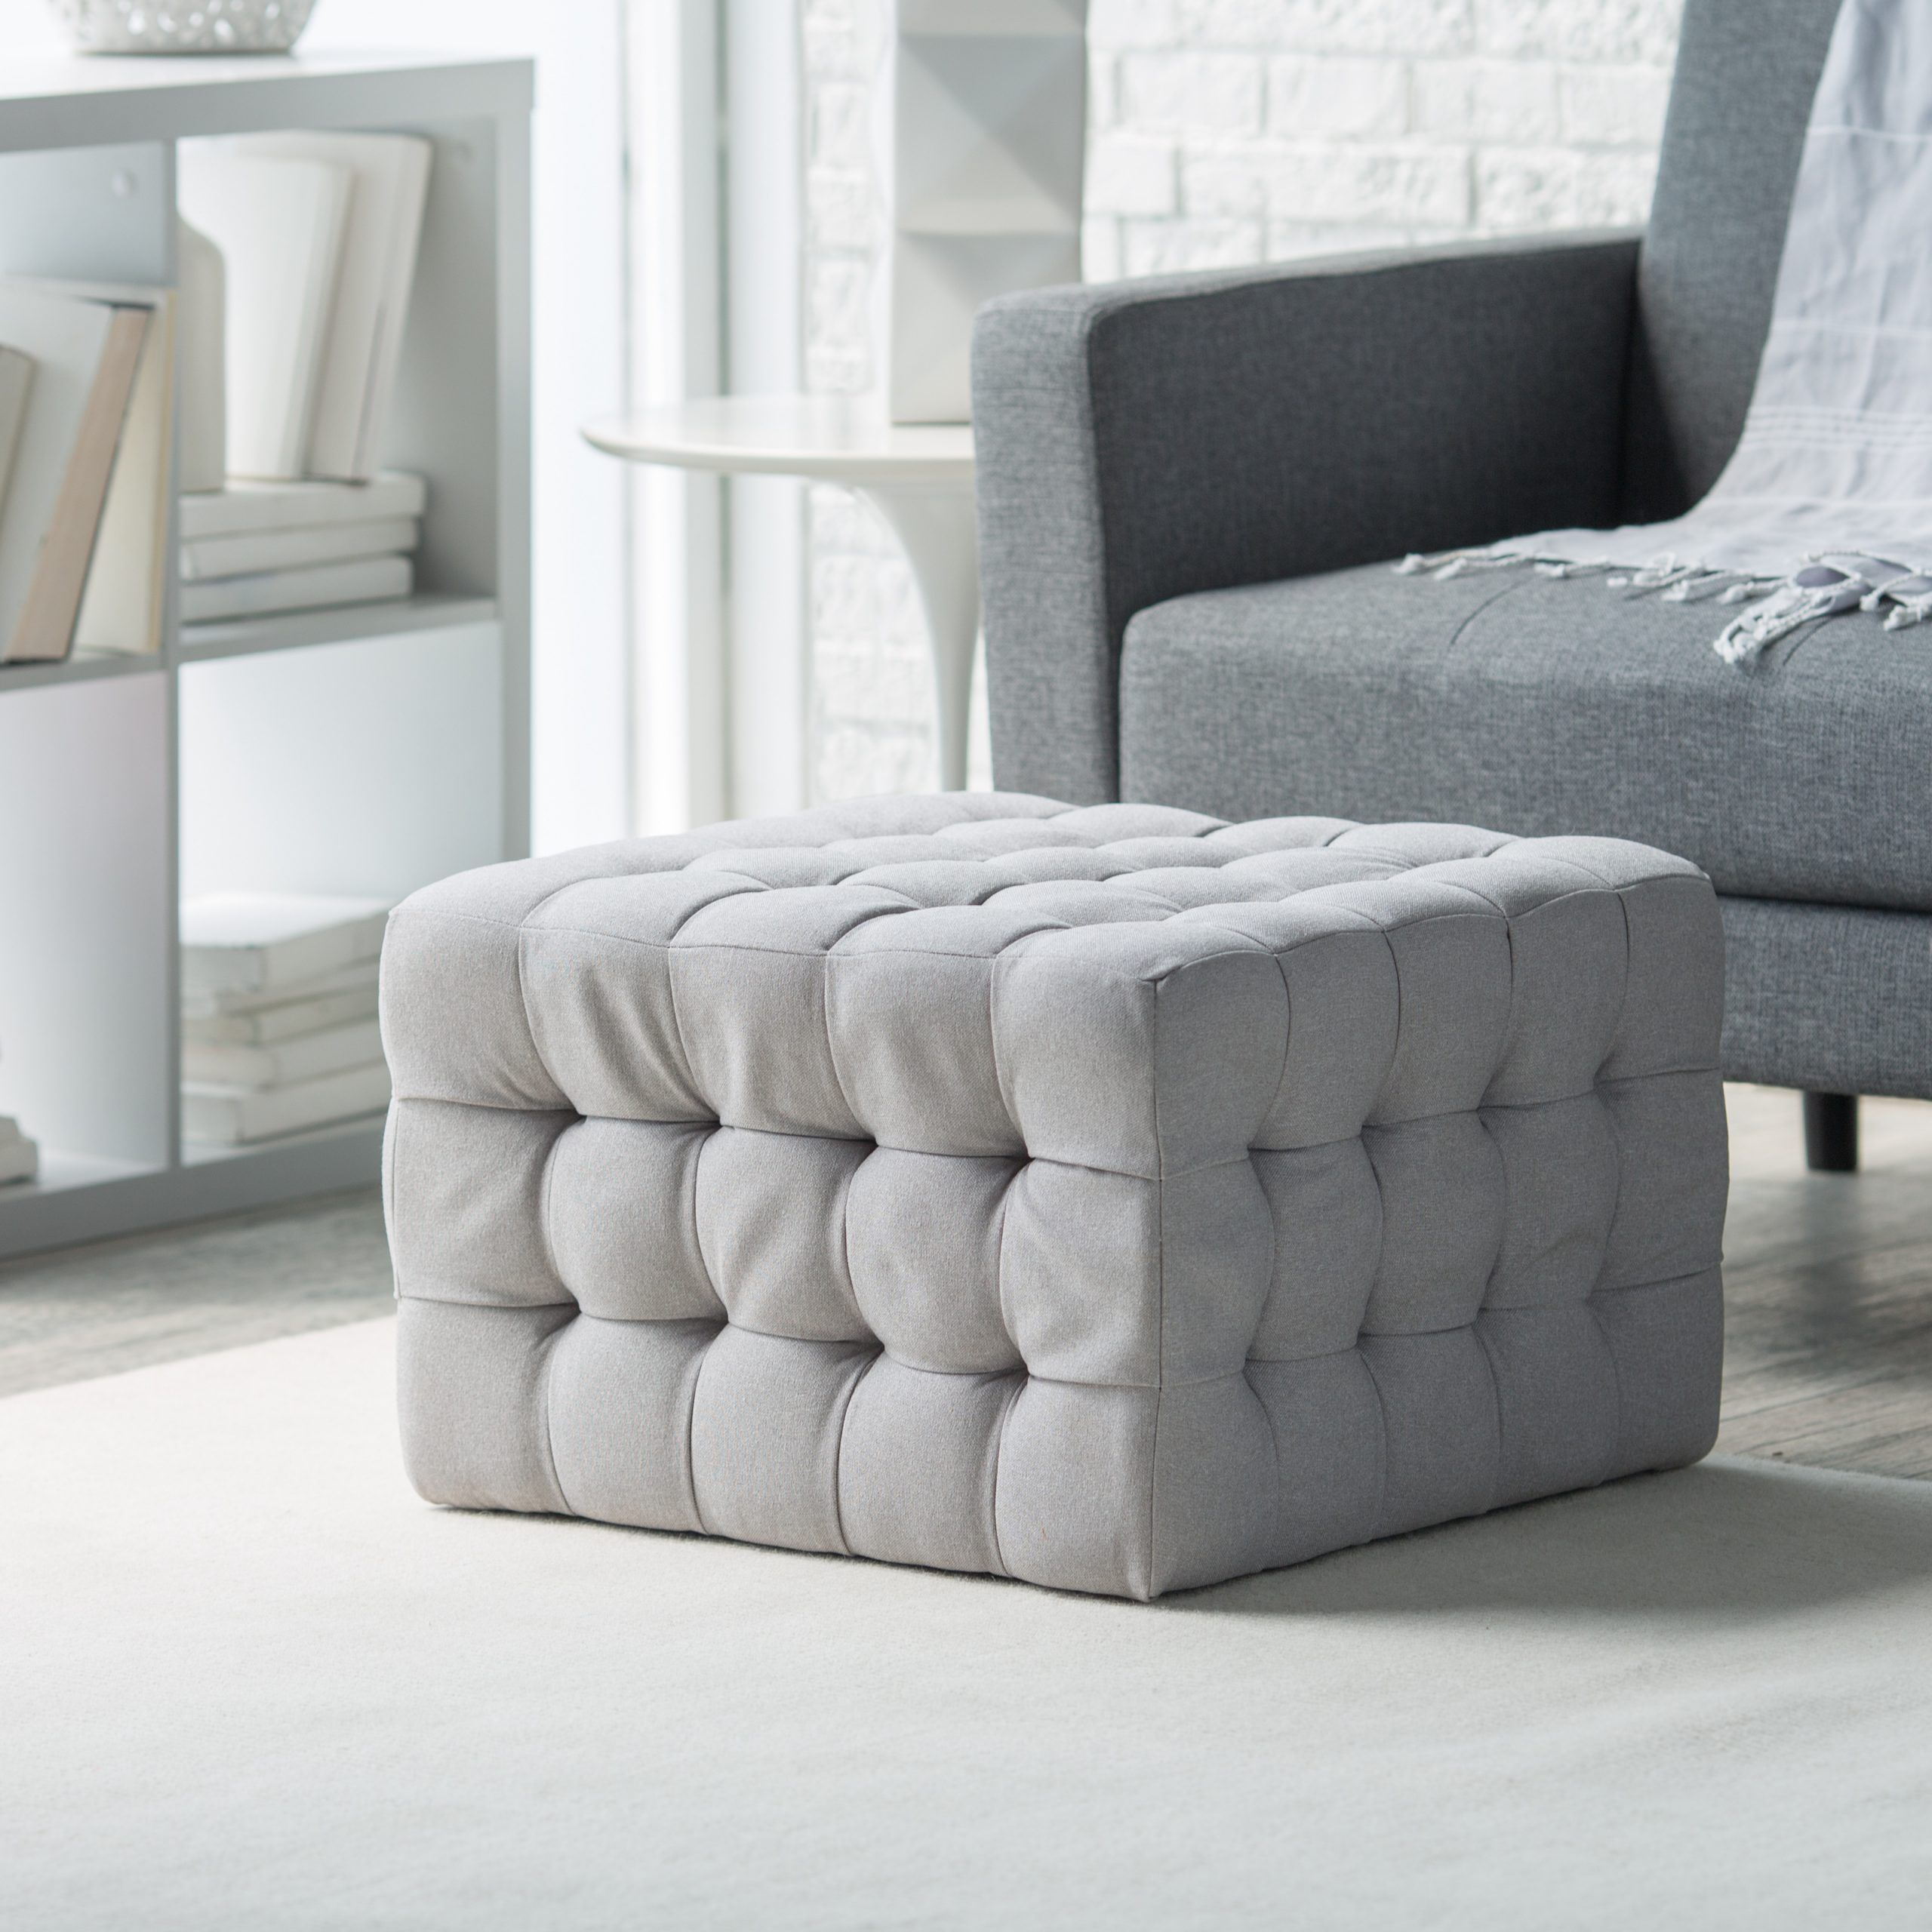 Belham Living Allover Tufted Square Ottoman – Grey – Ottomans At Hayneedle Inside Best And Newest Fabric Tufted Square Cocktail Ottomans (View 10 of 10)